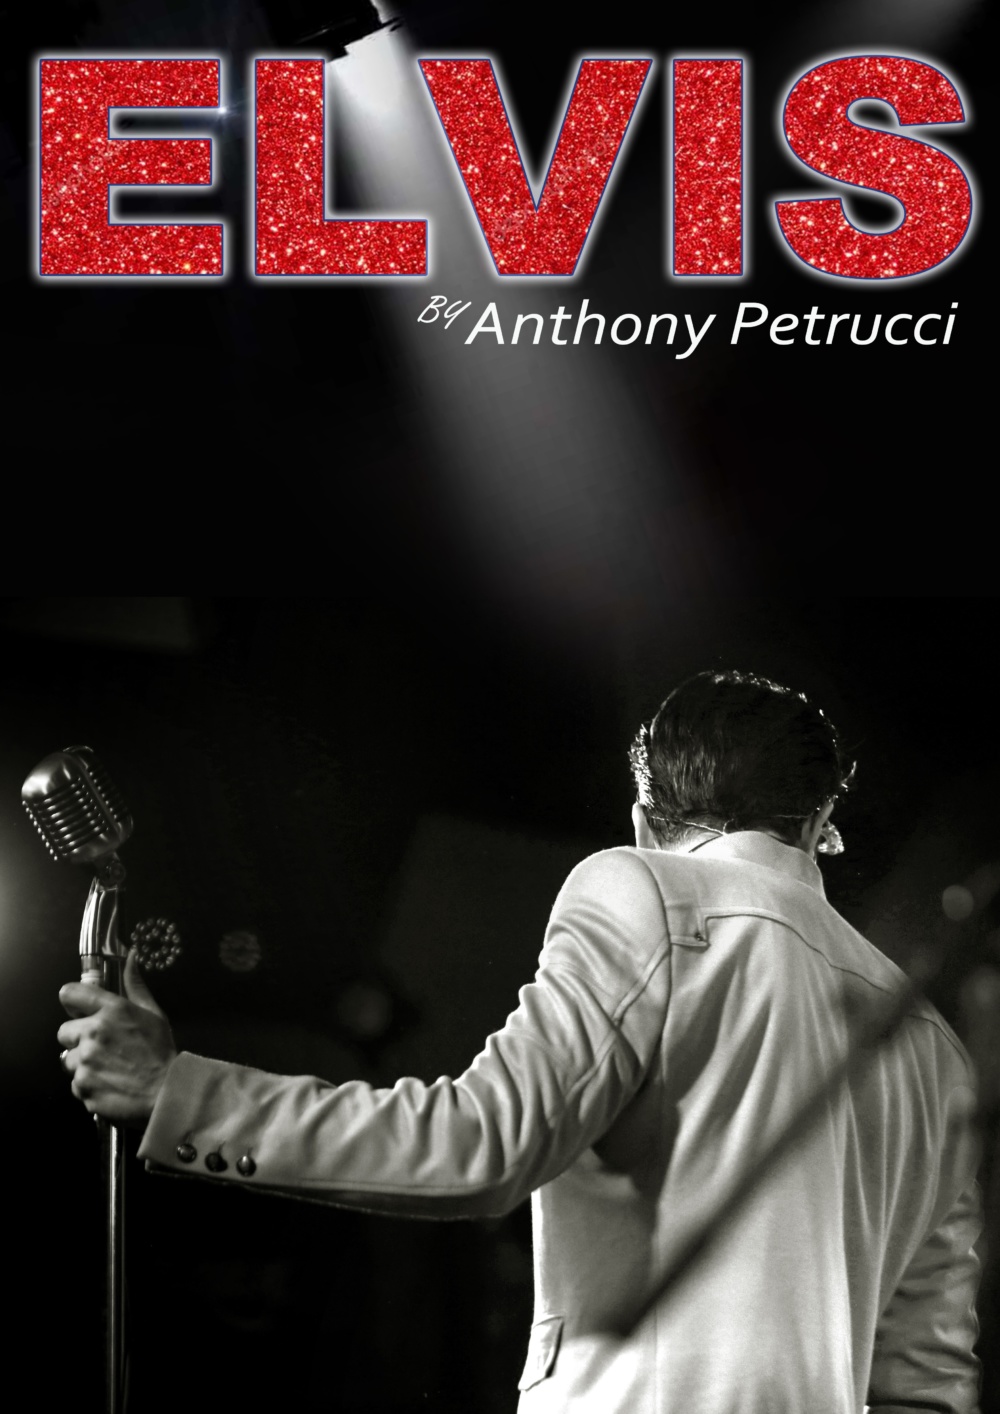 Elvis by Anthony Petrucci - Dinner & Tribute Show!